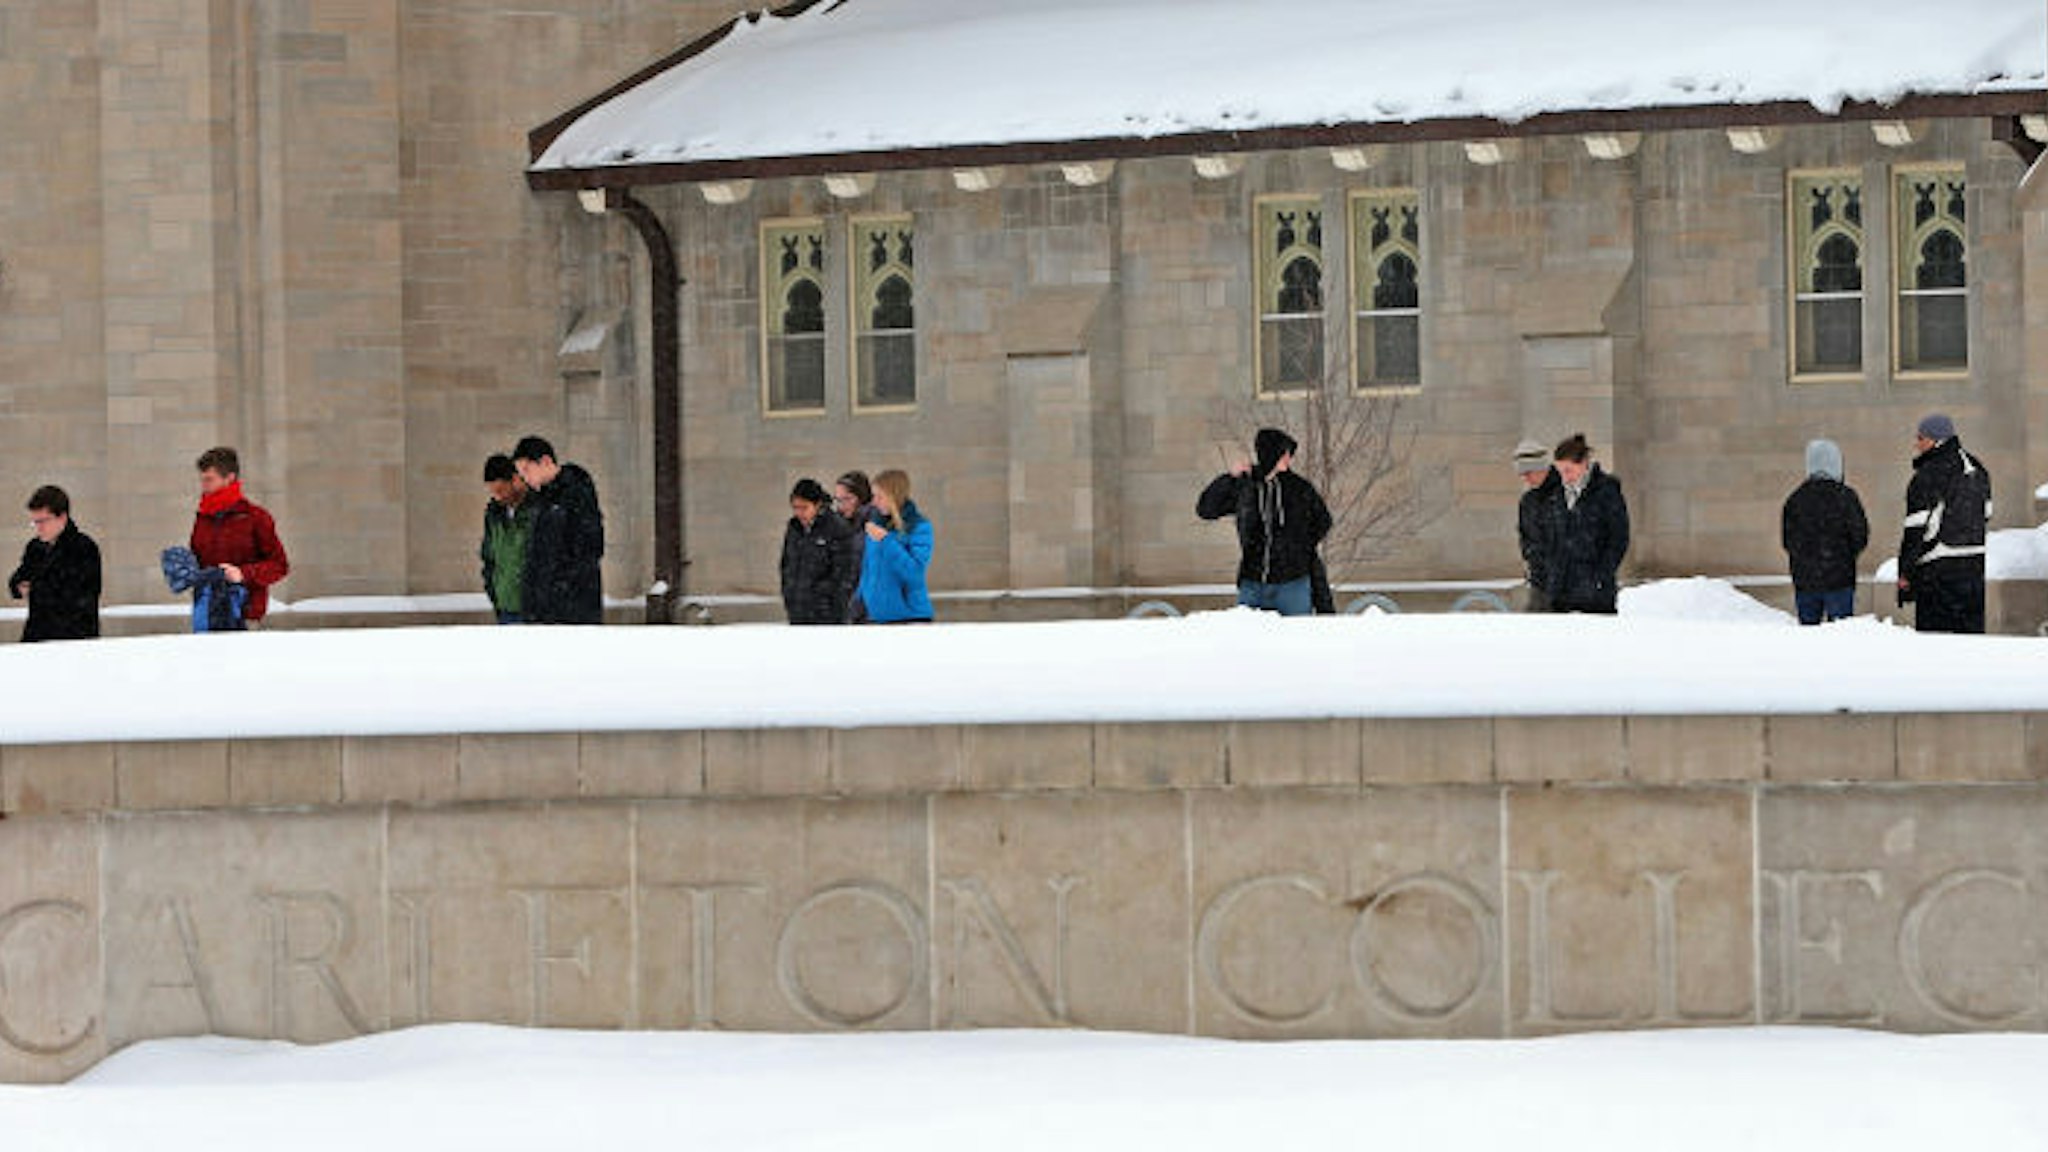 Carleton College students left the Skinner Memorial Chapel after a memorial service for three Carleton College students killed on the icy roads north of Northfield on Friday